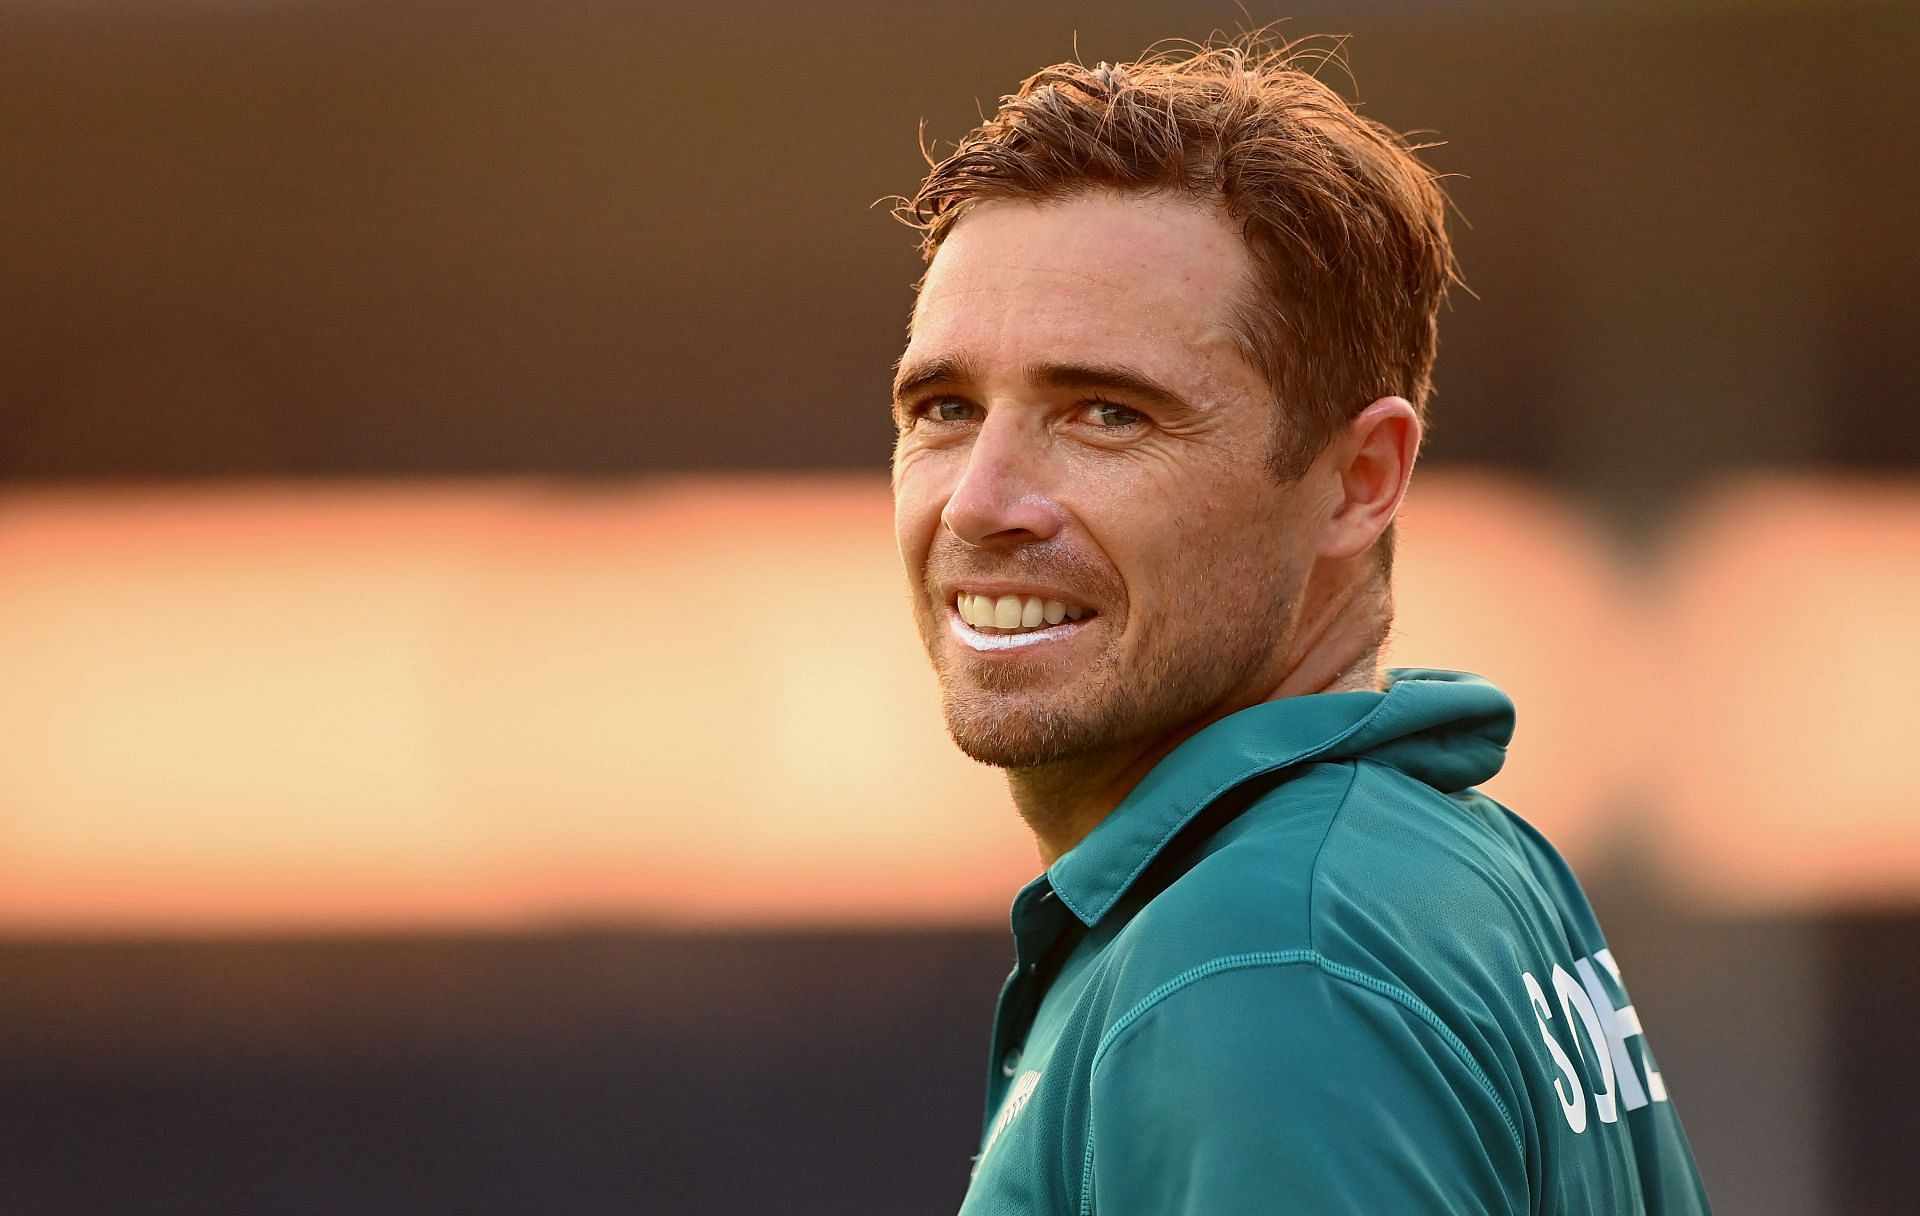 Which teams will eye for Tim Southee ahead of the next IPL season?